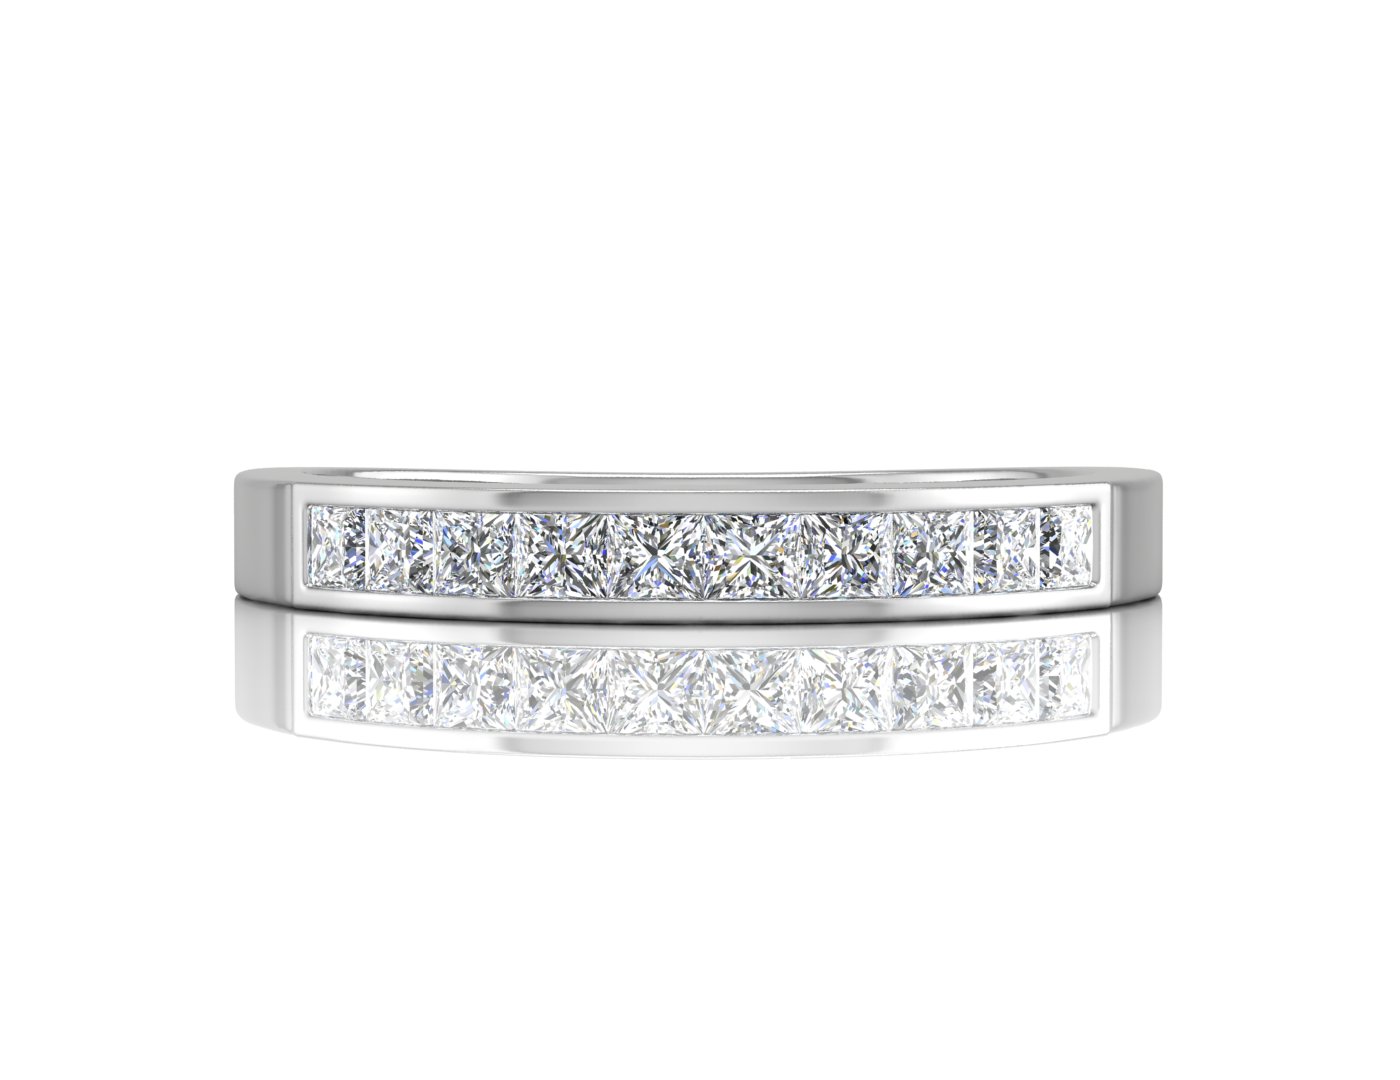 9ct White Gold Channel Set Half Eternity Diamond Ring 0.50 Carats - Image 2 of 6